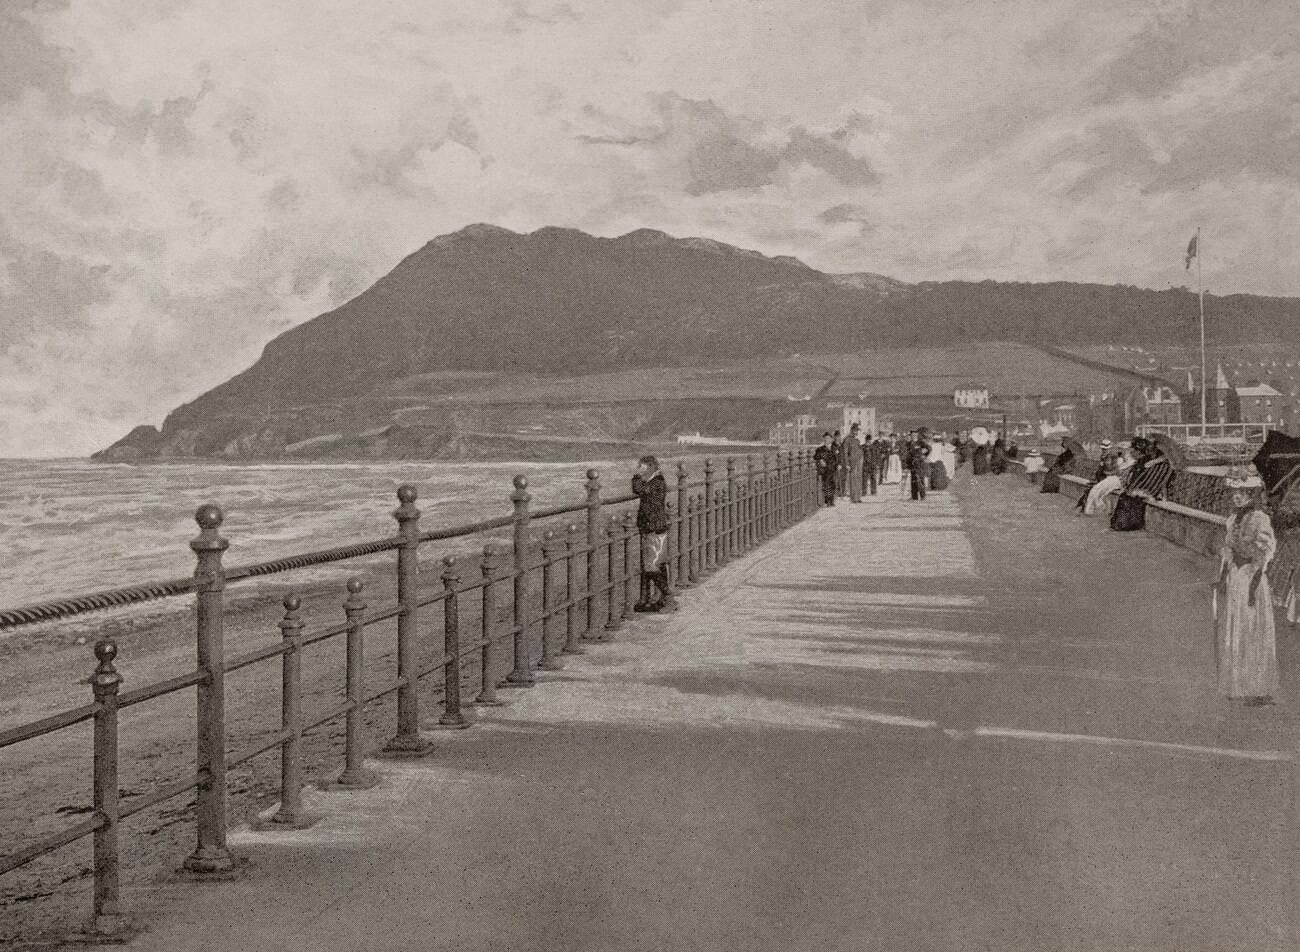 View of the promenade in Bray in north County Wicklow, Ireland.